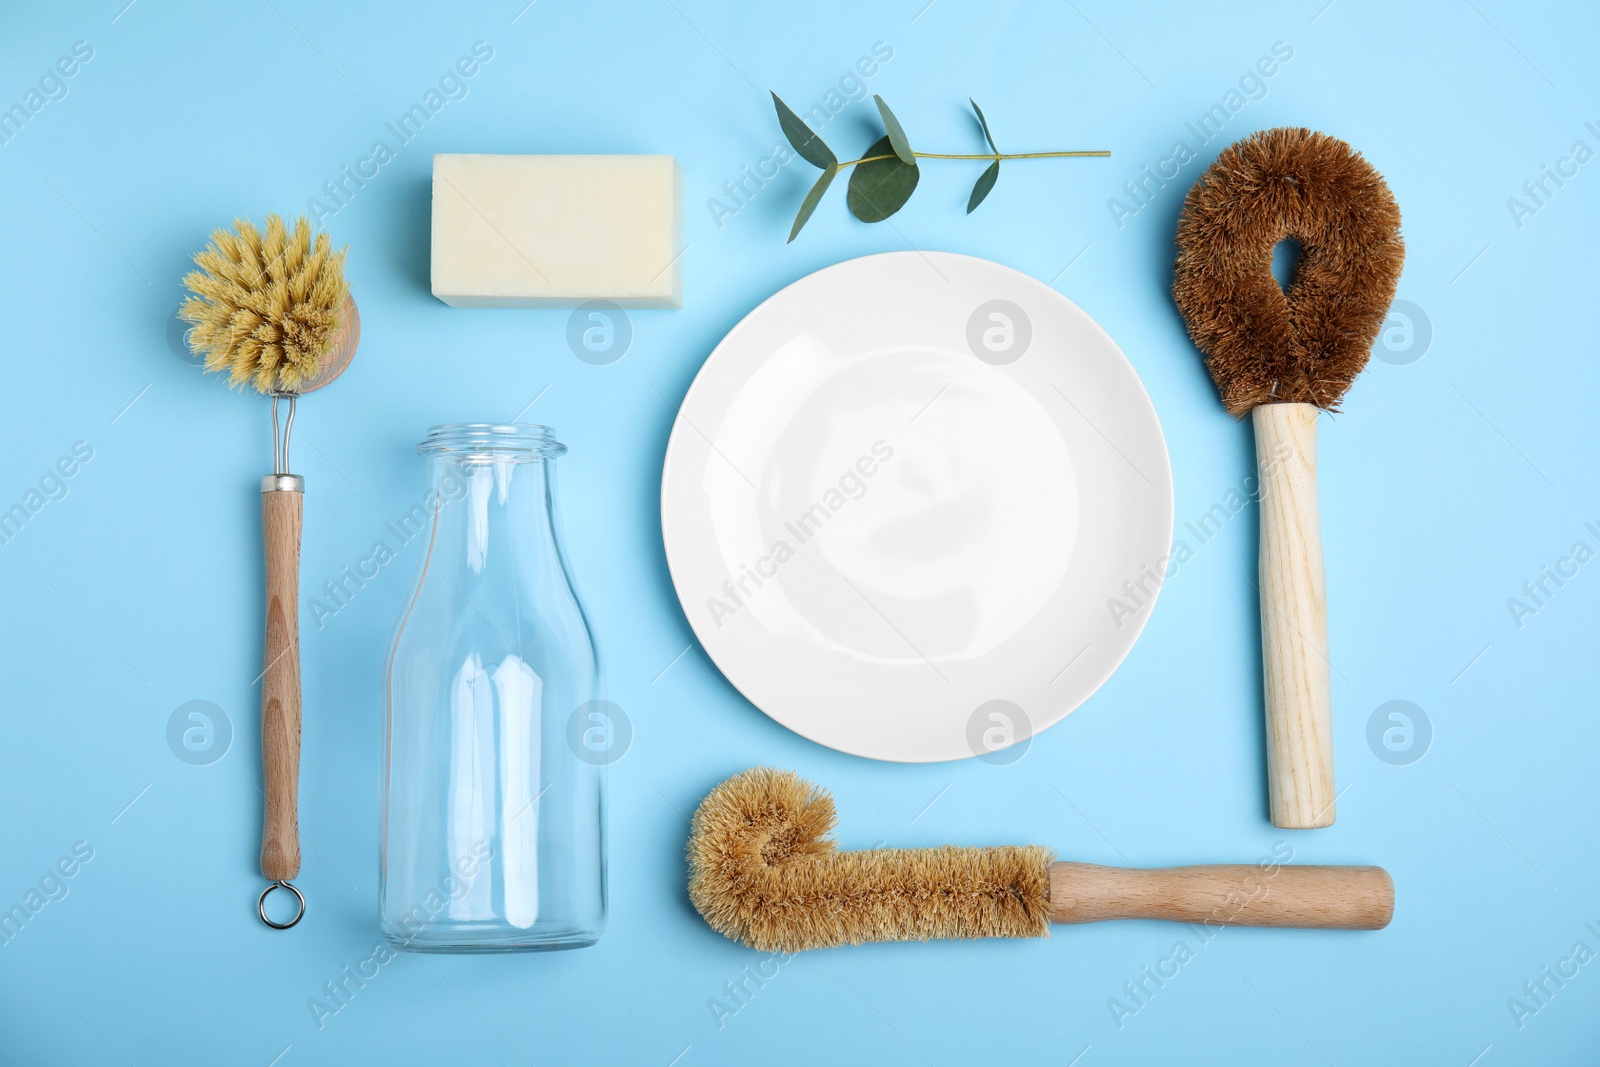 Photo of Flat lay composition with cleaning supplies for dish washing on light blue background, flat lay